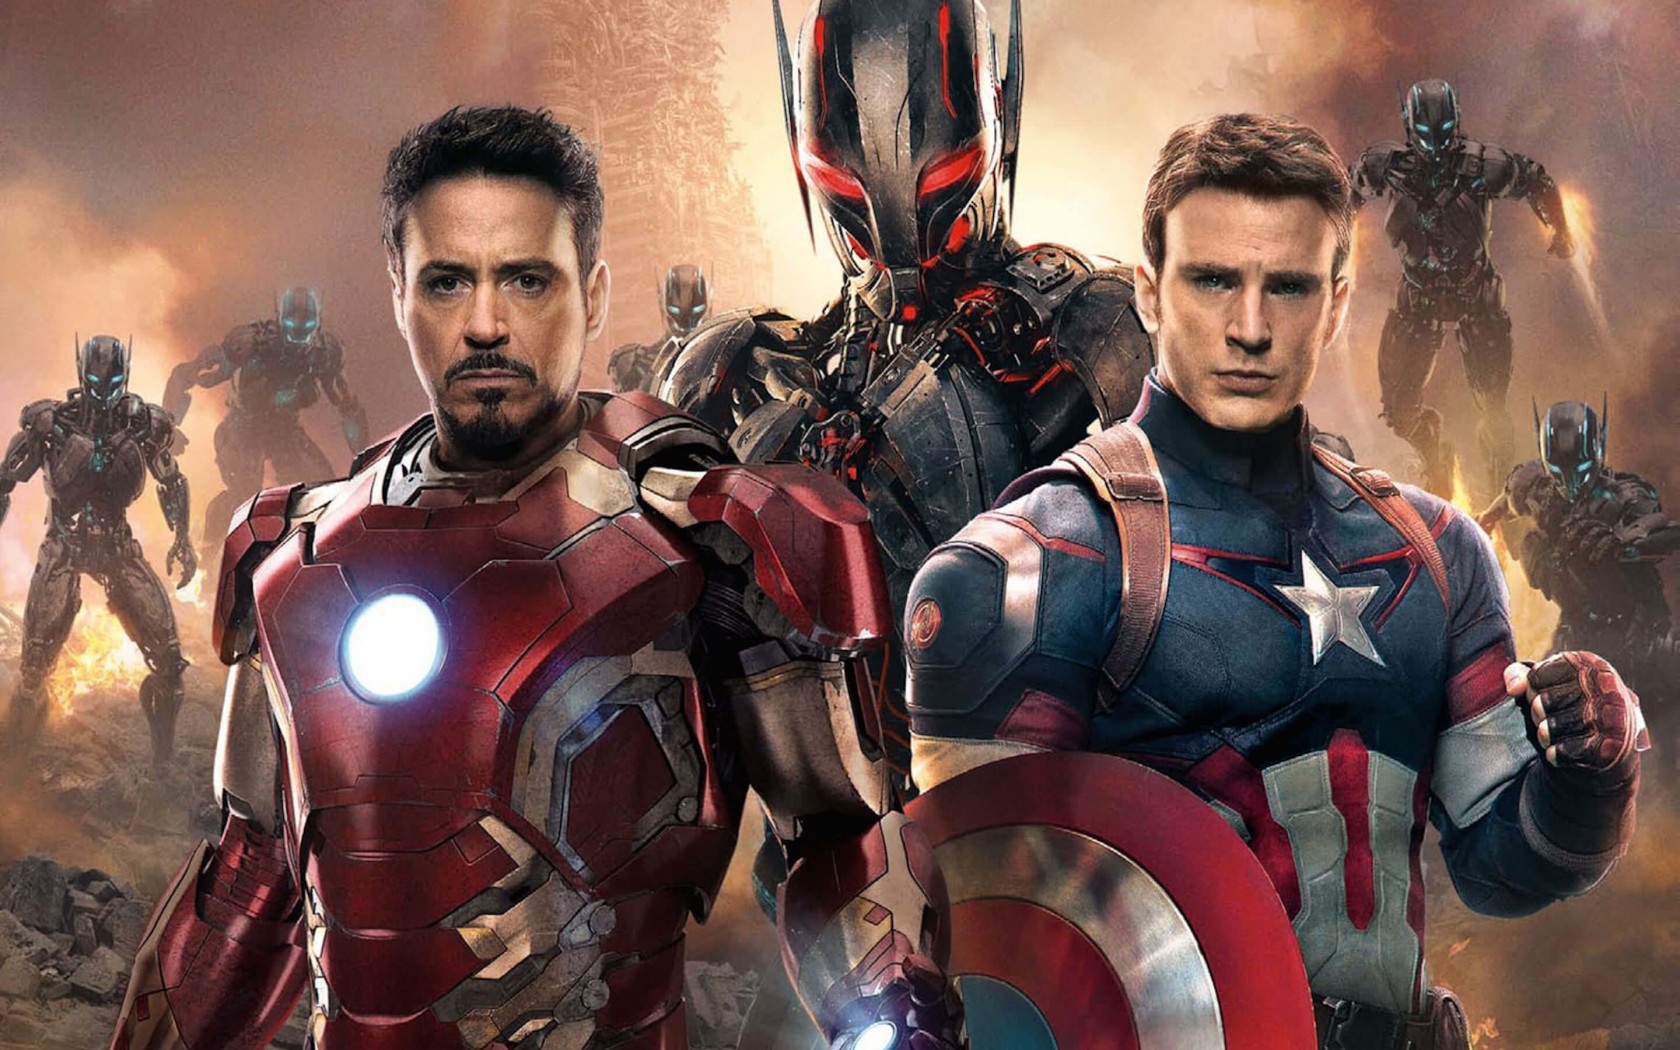 The Avengers: Age of Ultron - Iron Man and Captain America Wallpaper for Desktop 1680x1050